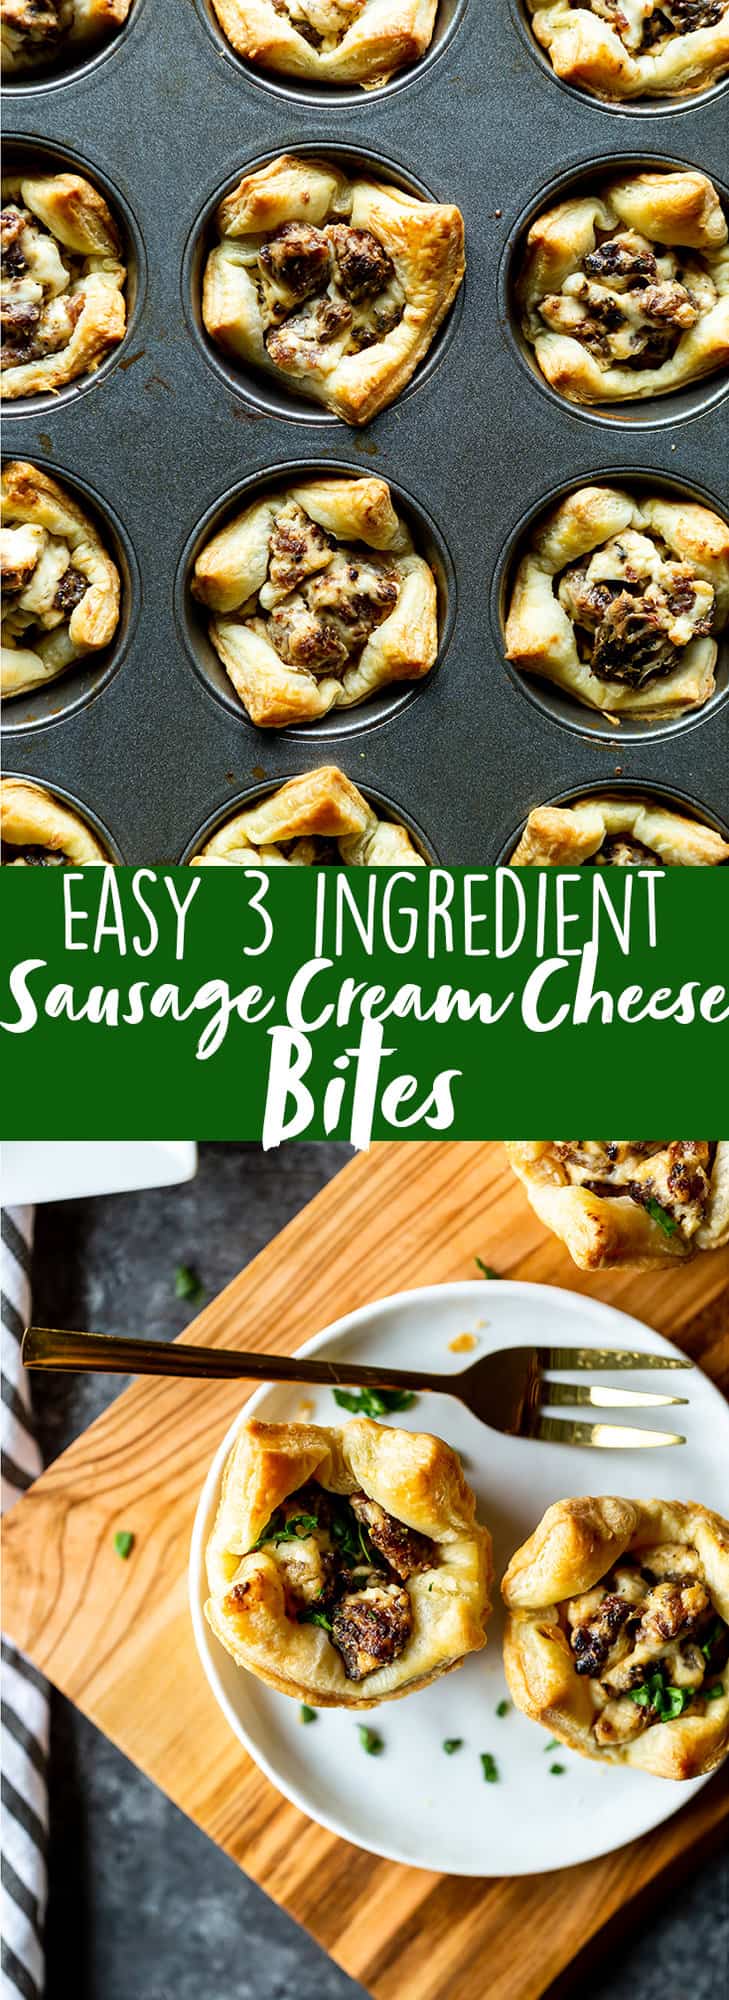 Easy Sausage Cream Cheese Bites - These Three ingredient, Easy Appetizers take under half an hour to make and are a crowd favorite!  The perfect party appetizer for New Year's Eve, Christmas, Thanksgiving or any other party. | Game Day | football food | superbowl | Sausage appetizer | Sausage cream cheese crescents 